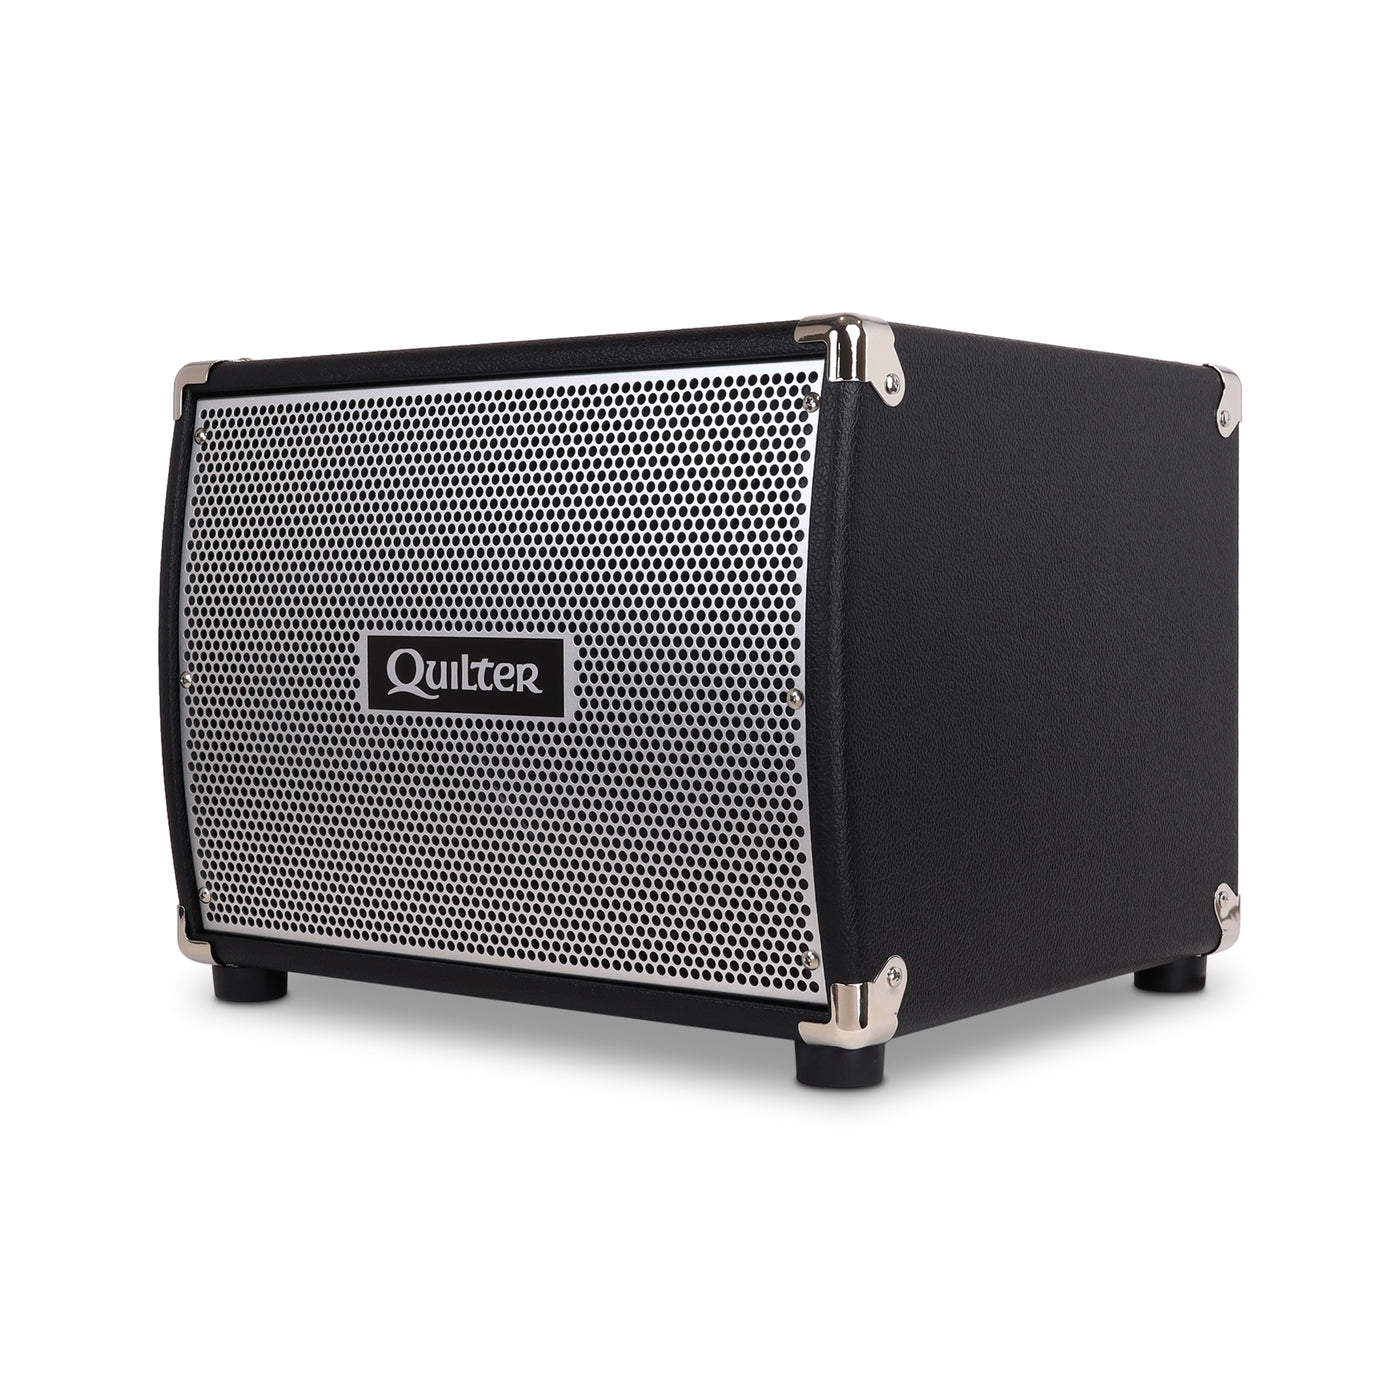 Quilter Labs BassDock 10 amplifier cabinet - facing diagonally to the left